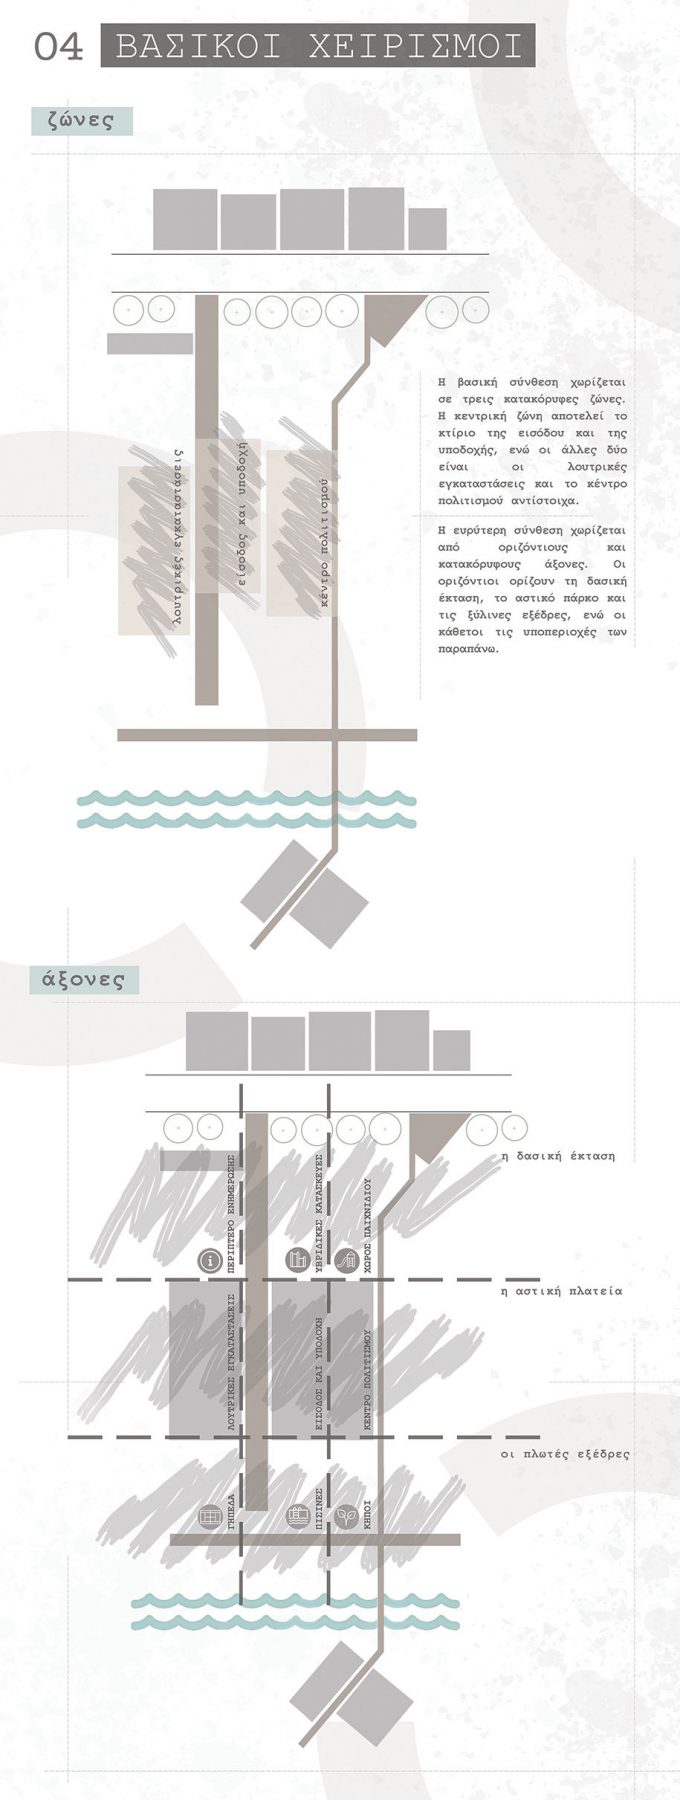 Archisearch Recalling the Past: A redevelopment in Marina of Aretsou | Thesis by Vassiliki Tzigkoura